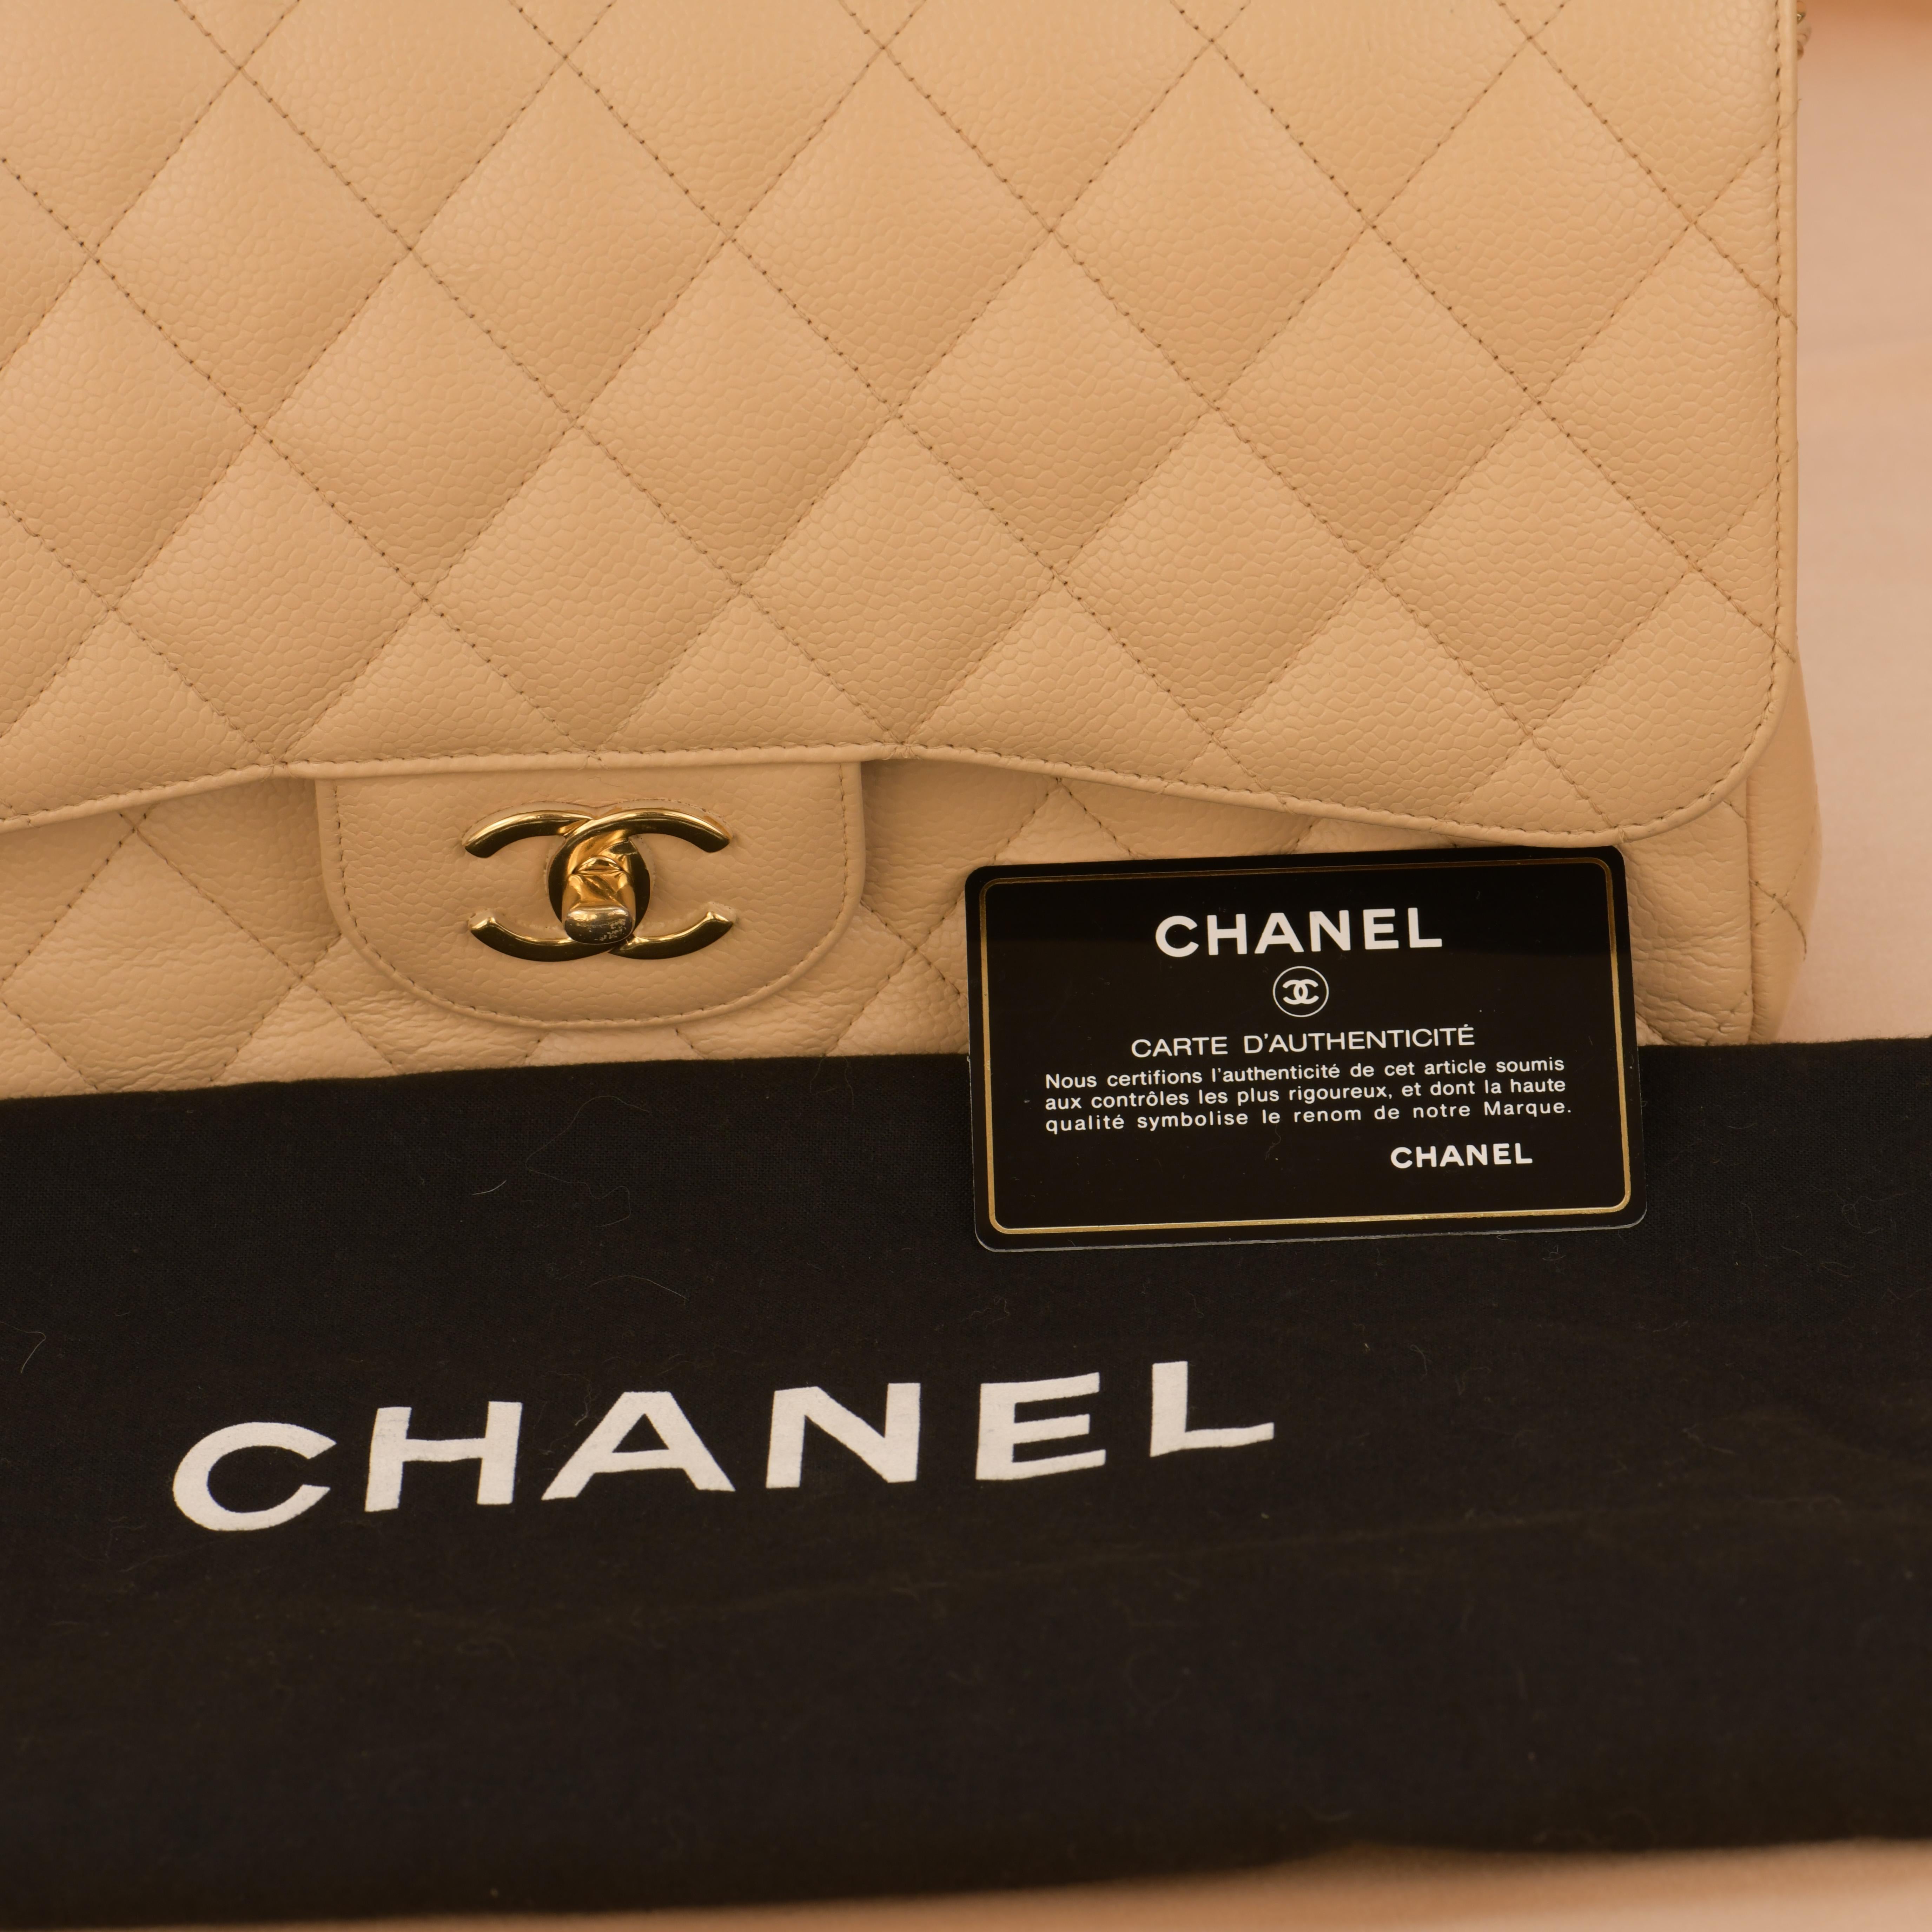 Dandelion Code	AT-1405
Brand	Chanel
Model	Timeless
Serial No.	14******
Color	Beige
Date	Approx. 2011
Metal	Gold
Material	Calfskin
Measurements	Approx. 20cm H x 30cm W x 10cm D
Condition	Excellent 
Comes with	Chanel Dust bag /  Chanel Authentic